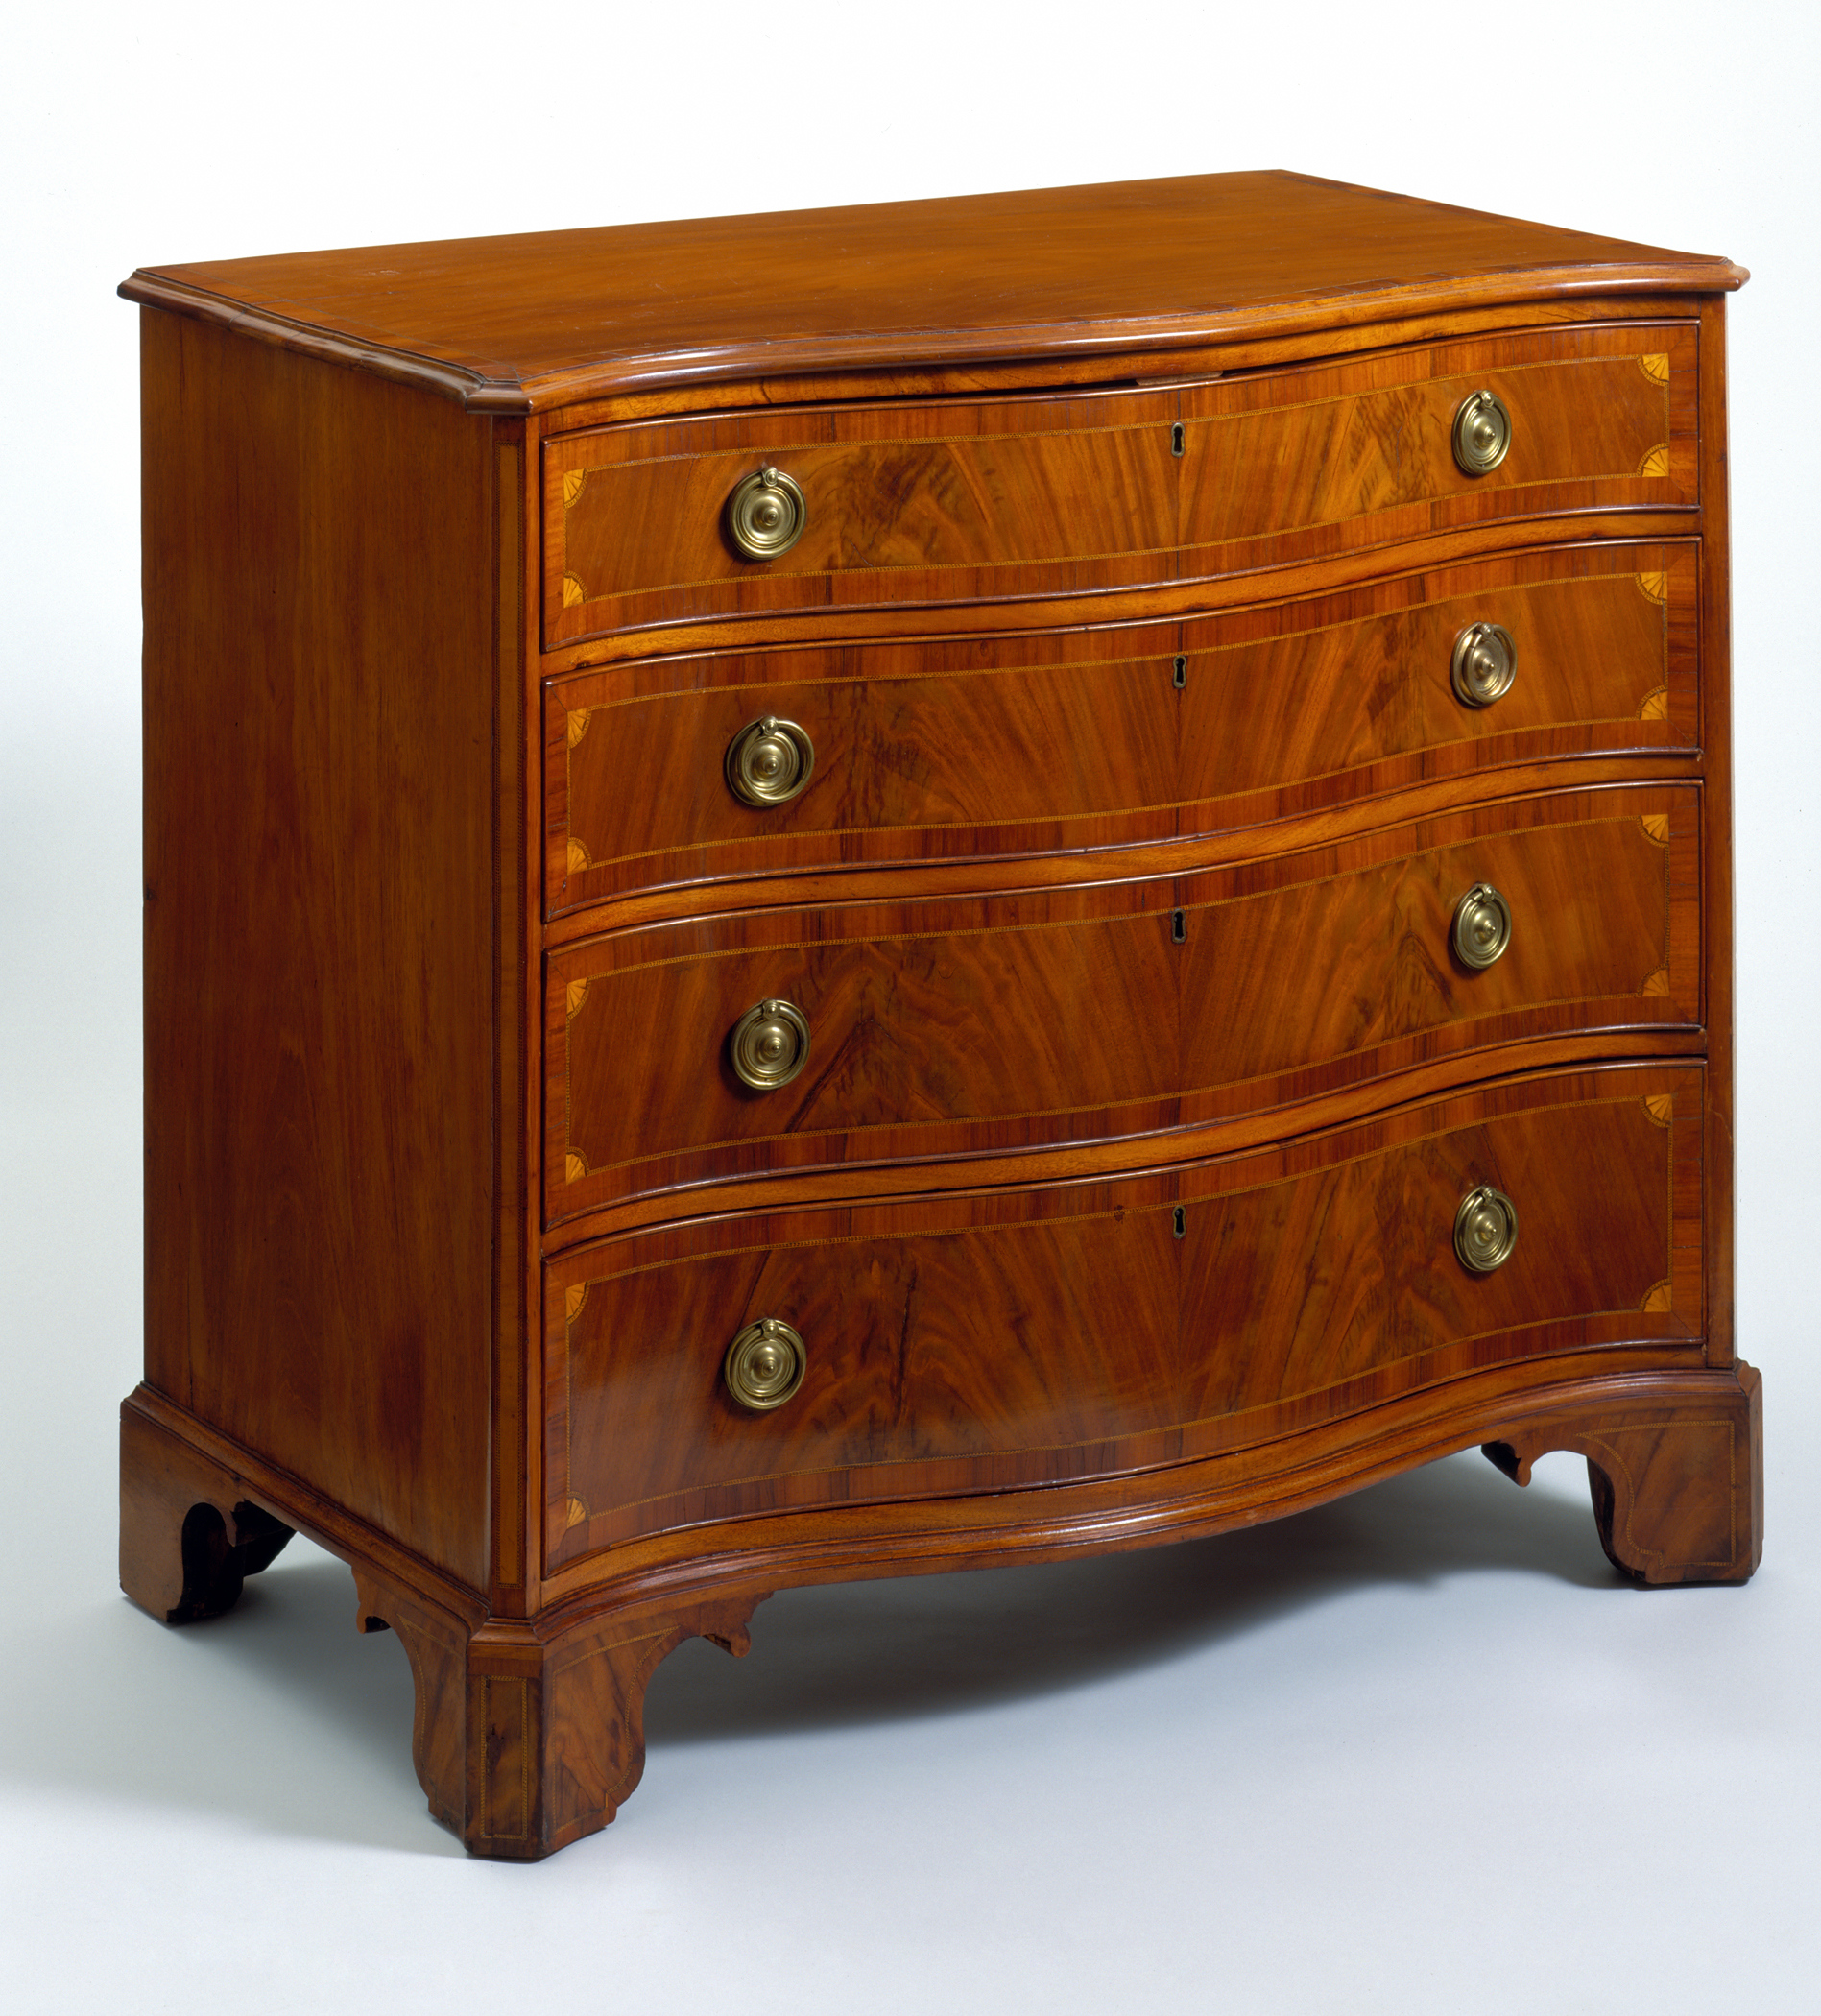 1957.0032.002 Chest of drawers